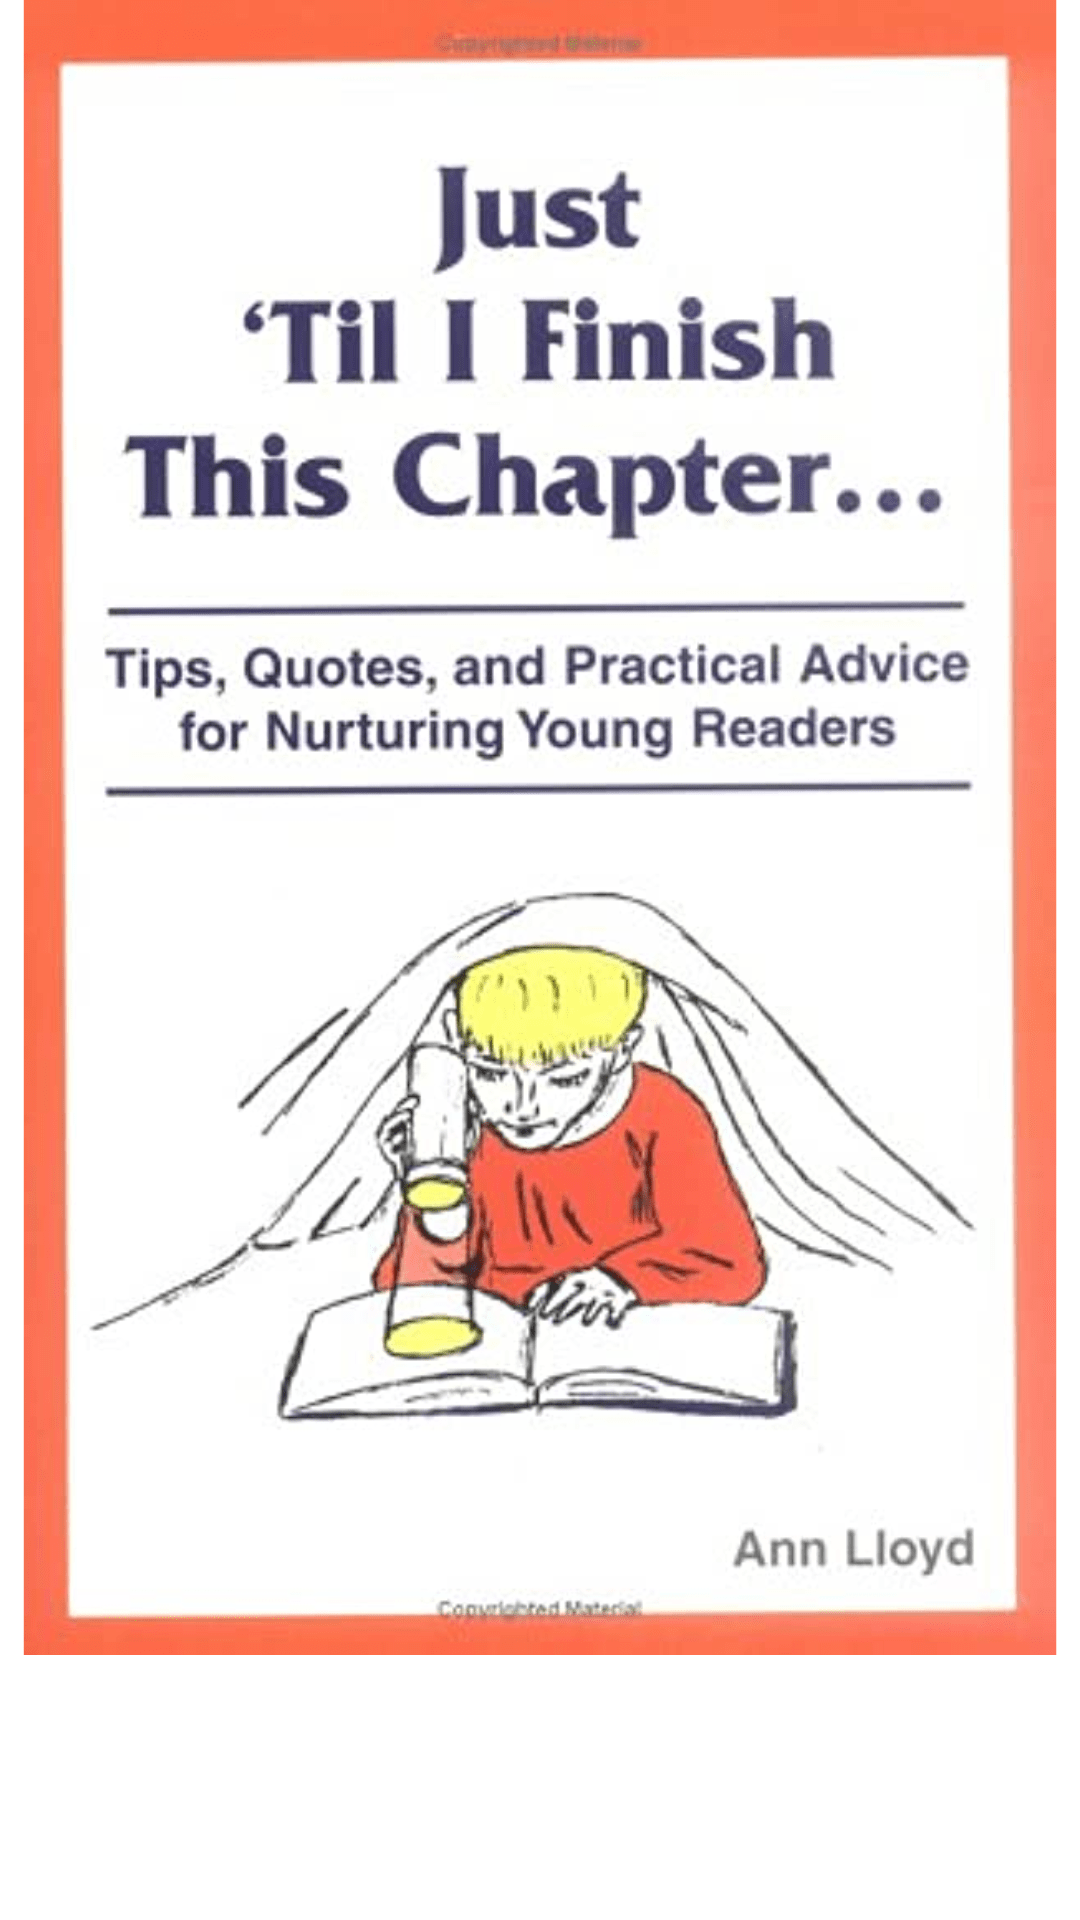 Just 'Til I Finish This Chapter..., Tips, Quotes, and Practical Advice for Nurturing Young Readers